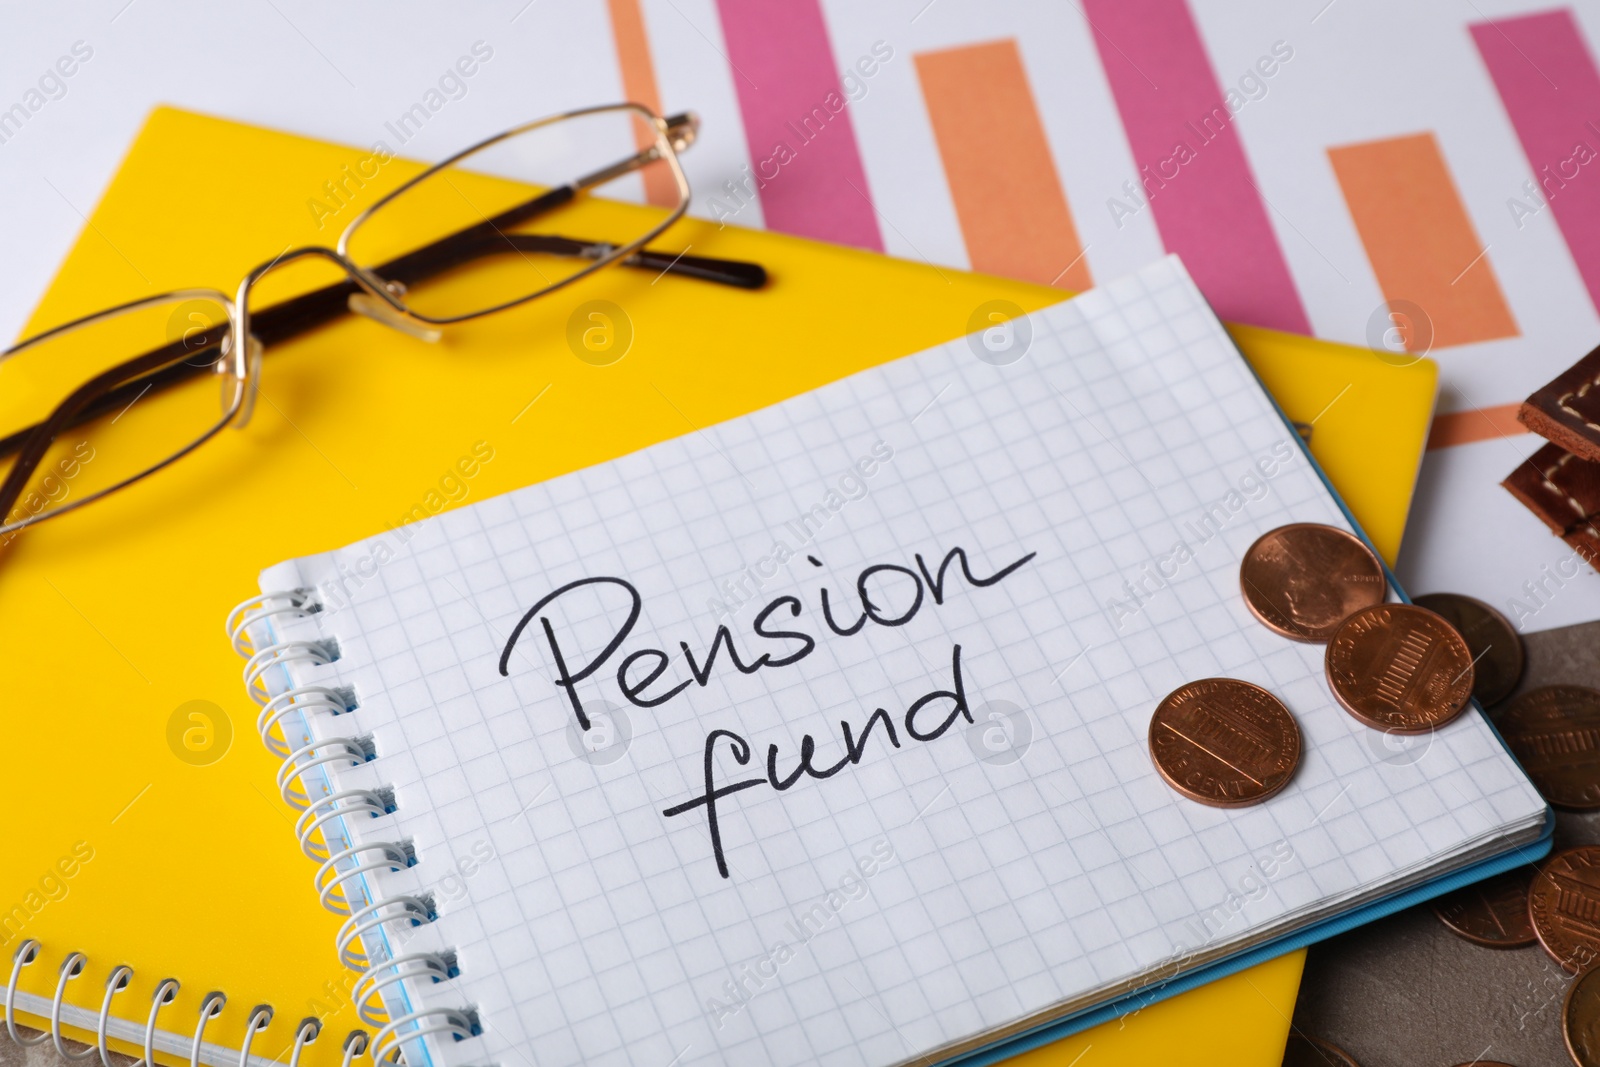 Photo of Coins, glasses and notebook with words PENSION FUND on table